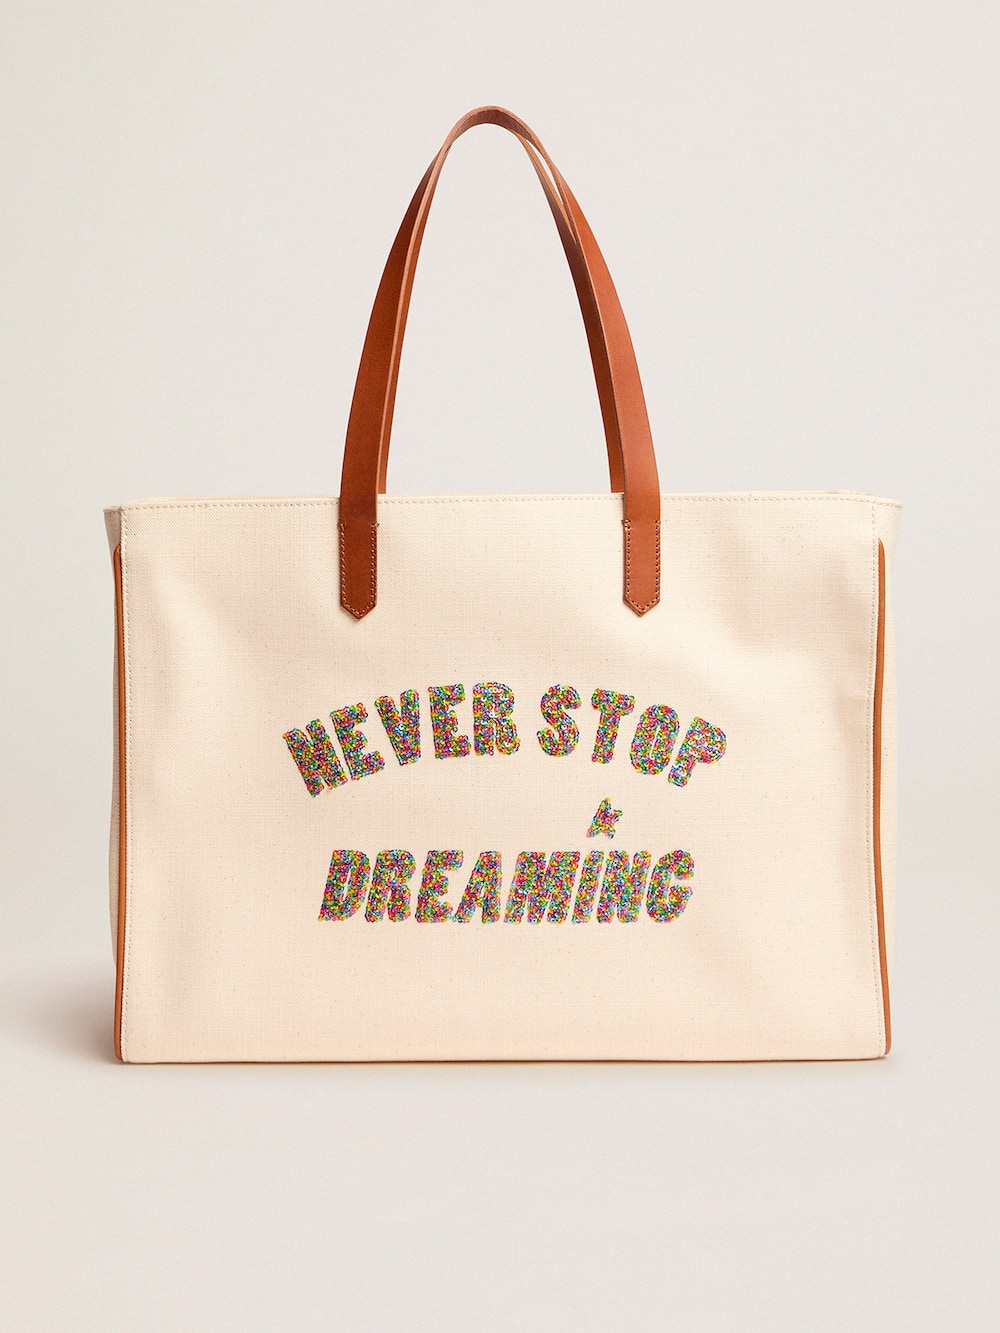 Golden Goose - Sac California East-West Never Stop Dreaming pailleté in 